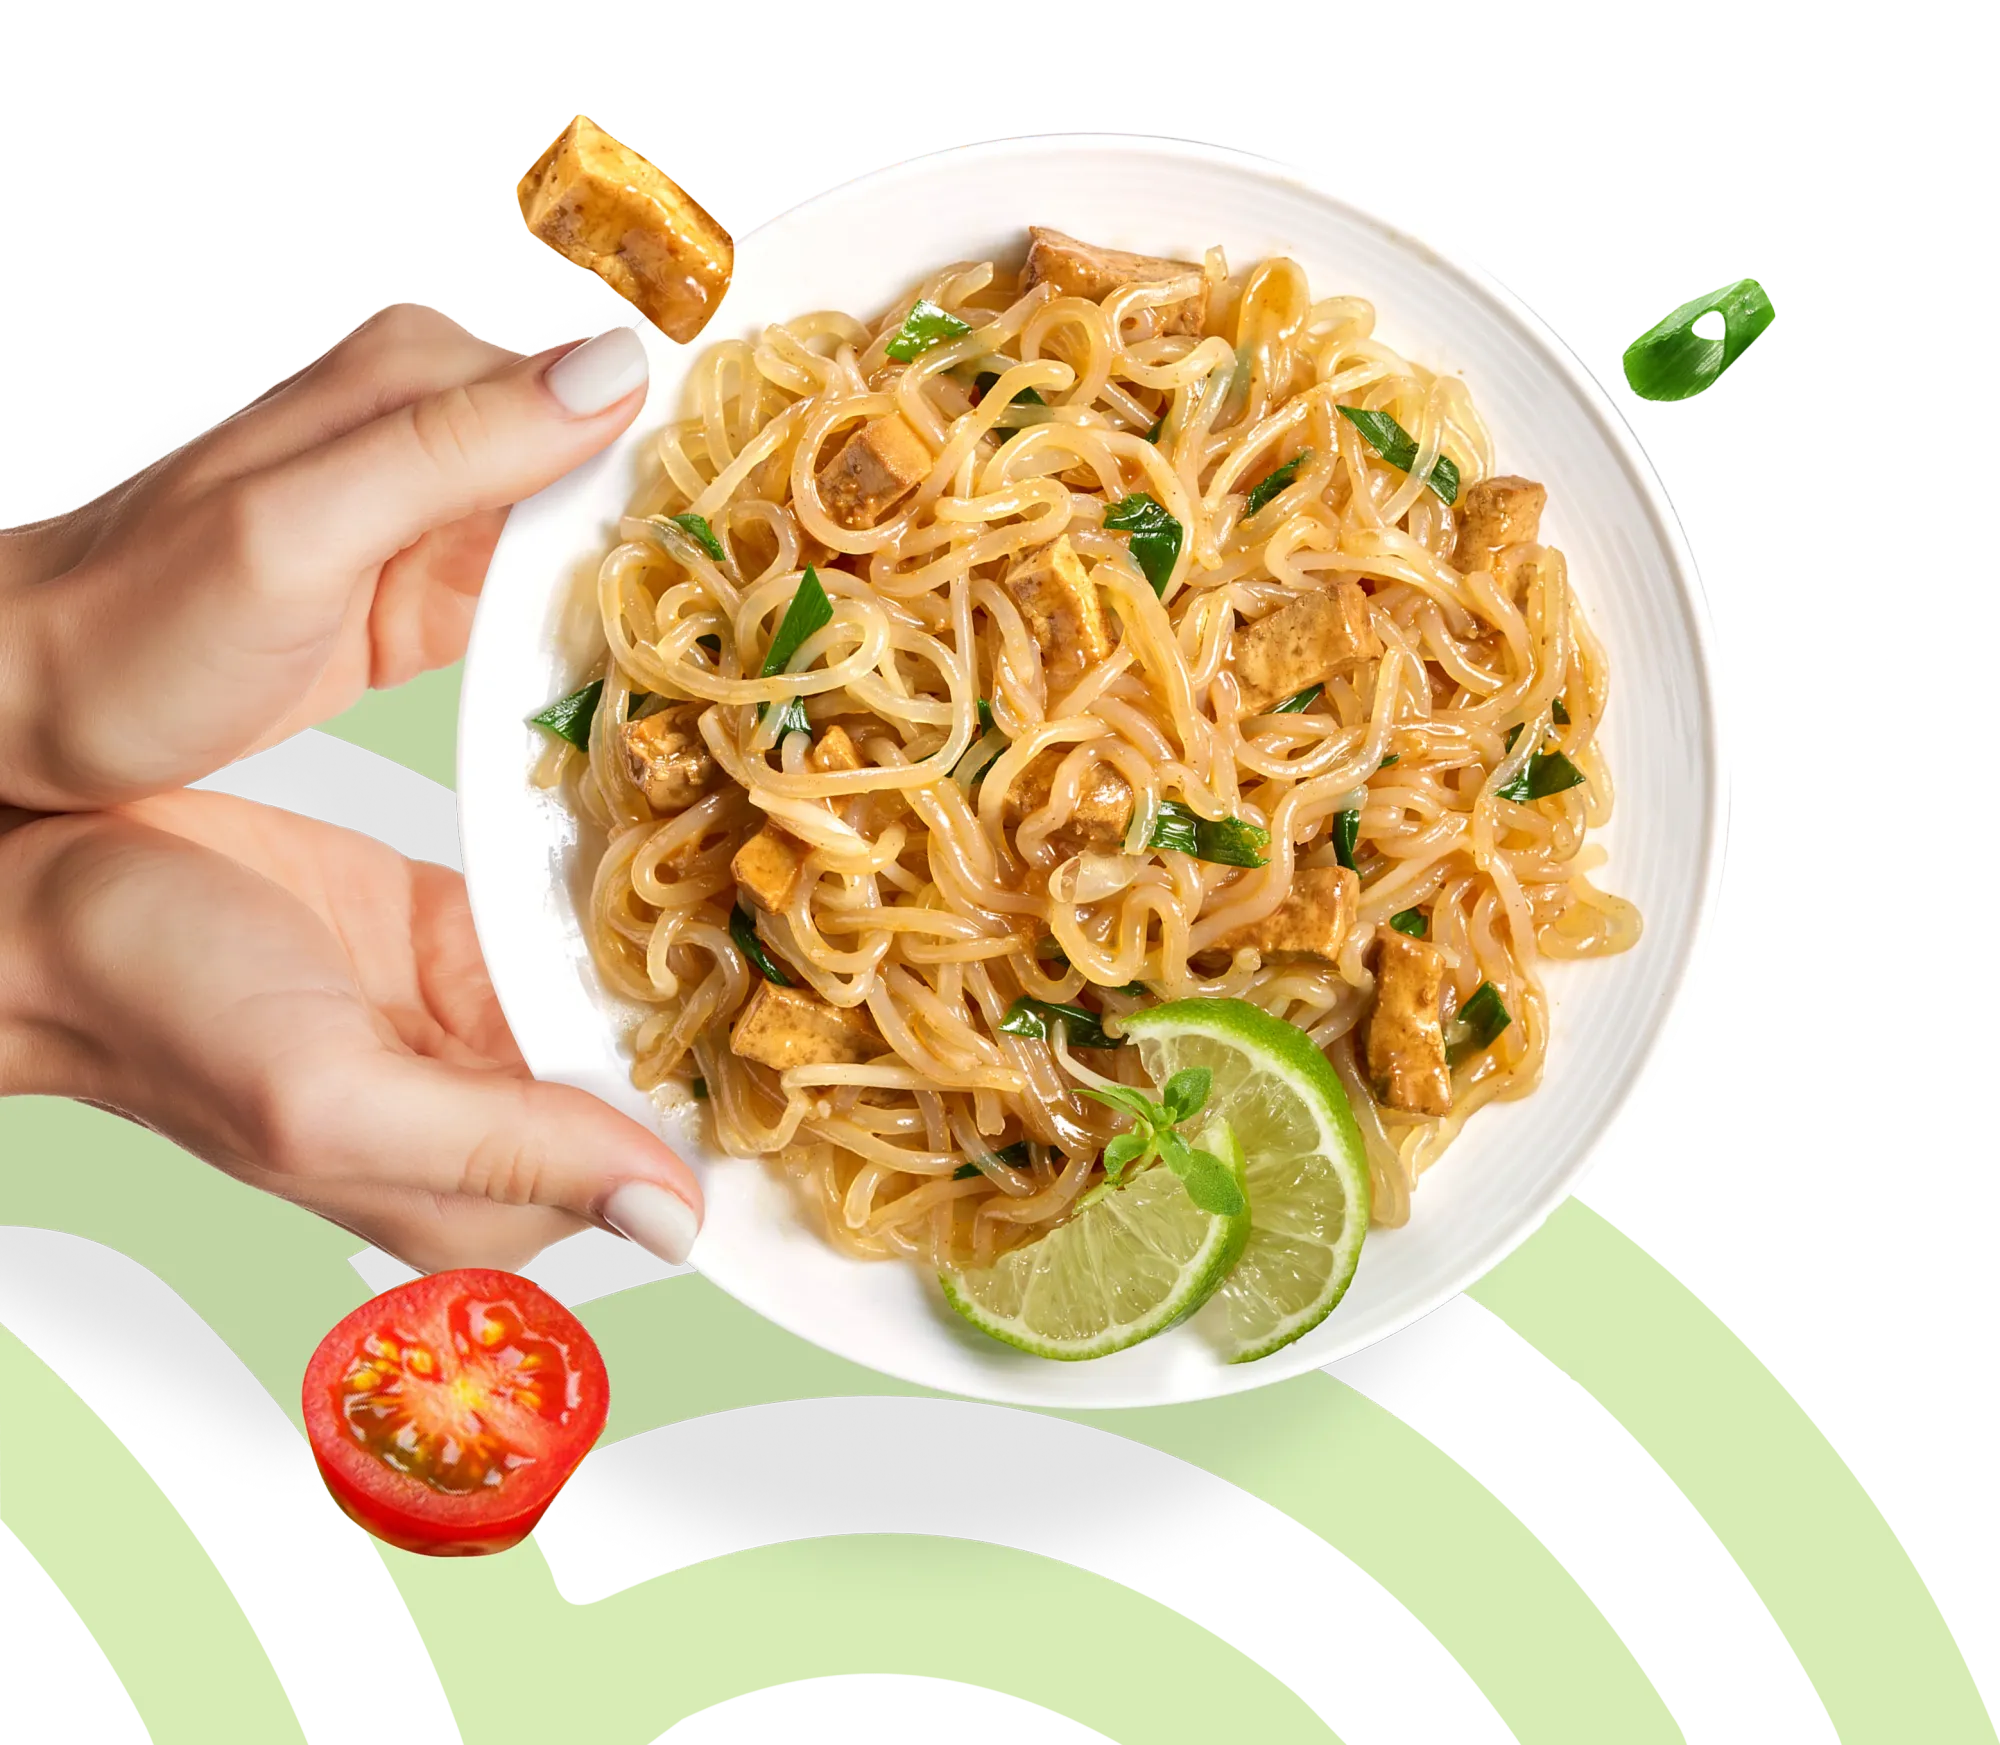 FREE Package of Miracle Noodle at Publix